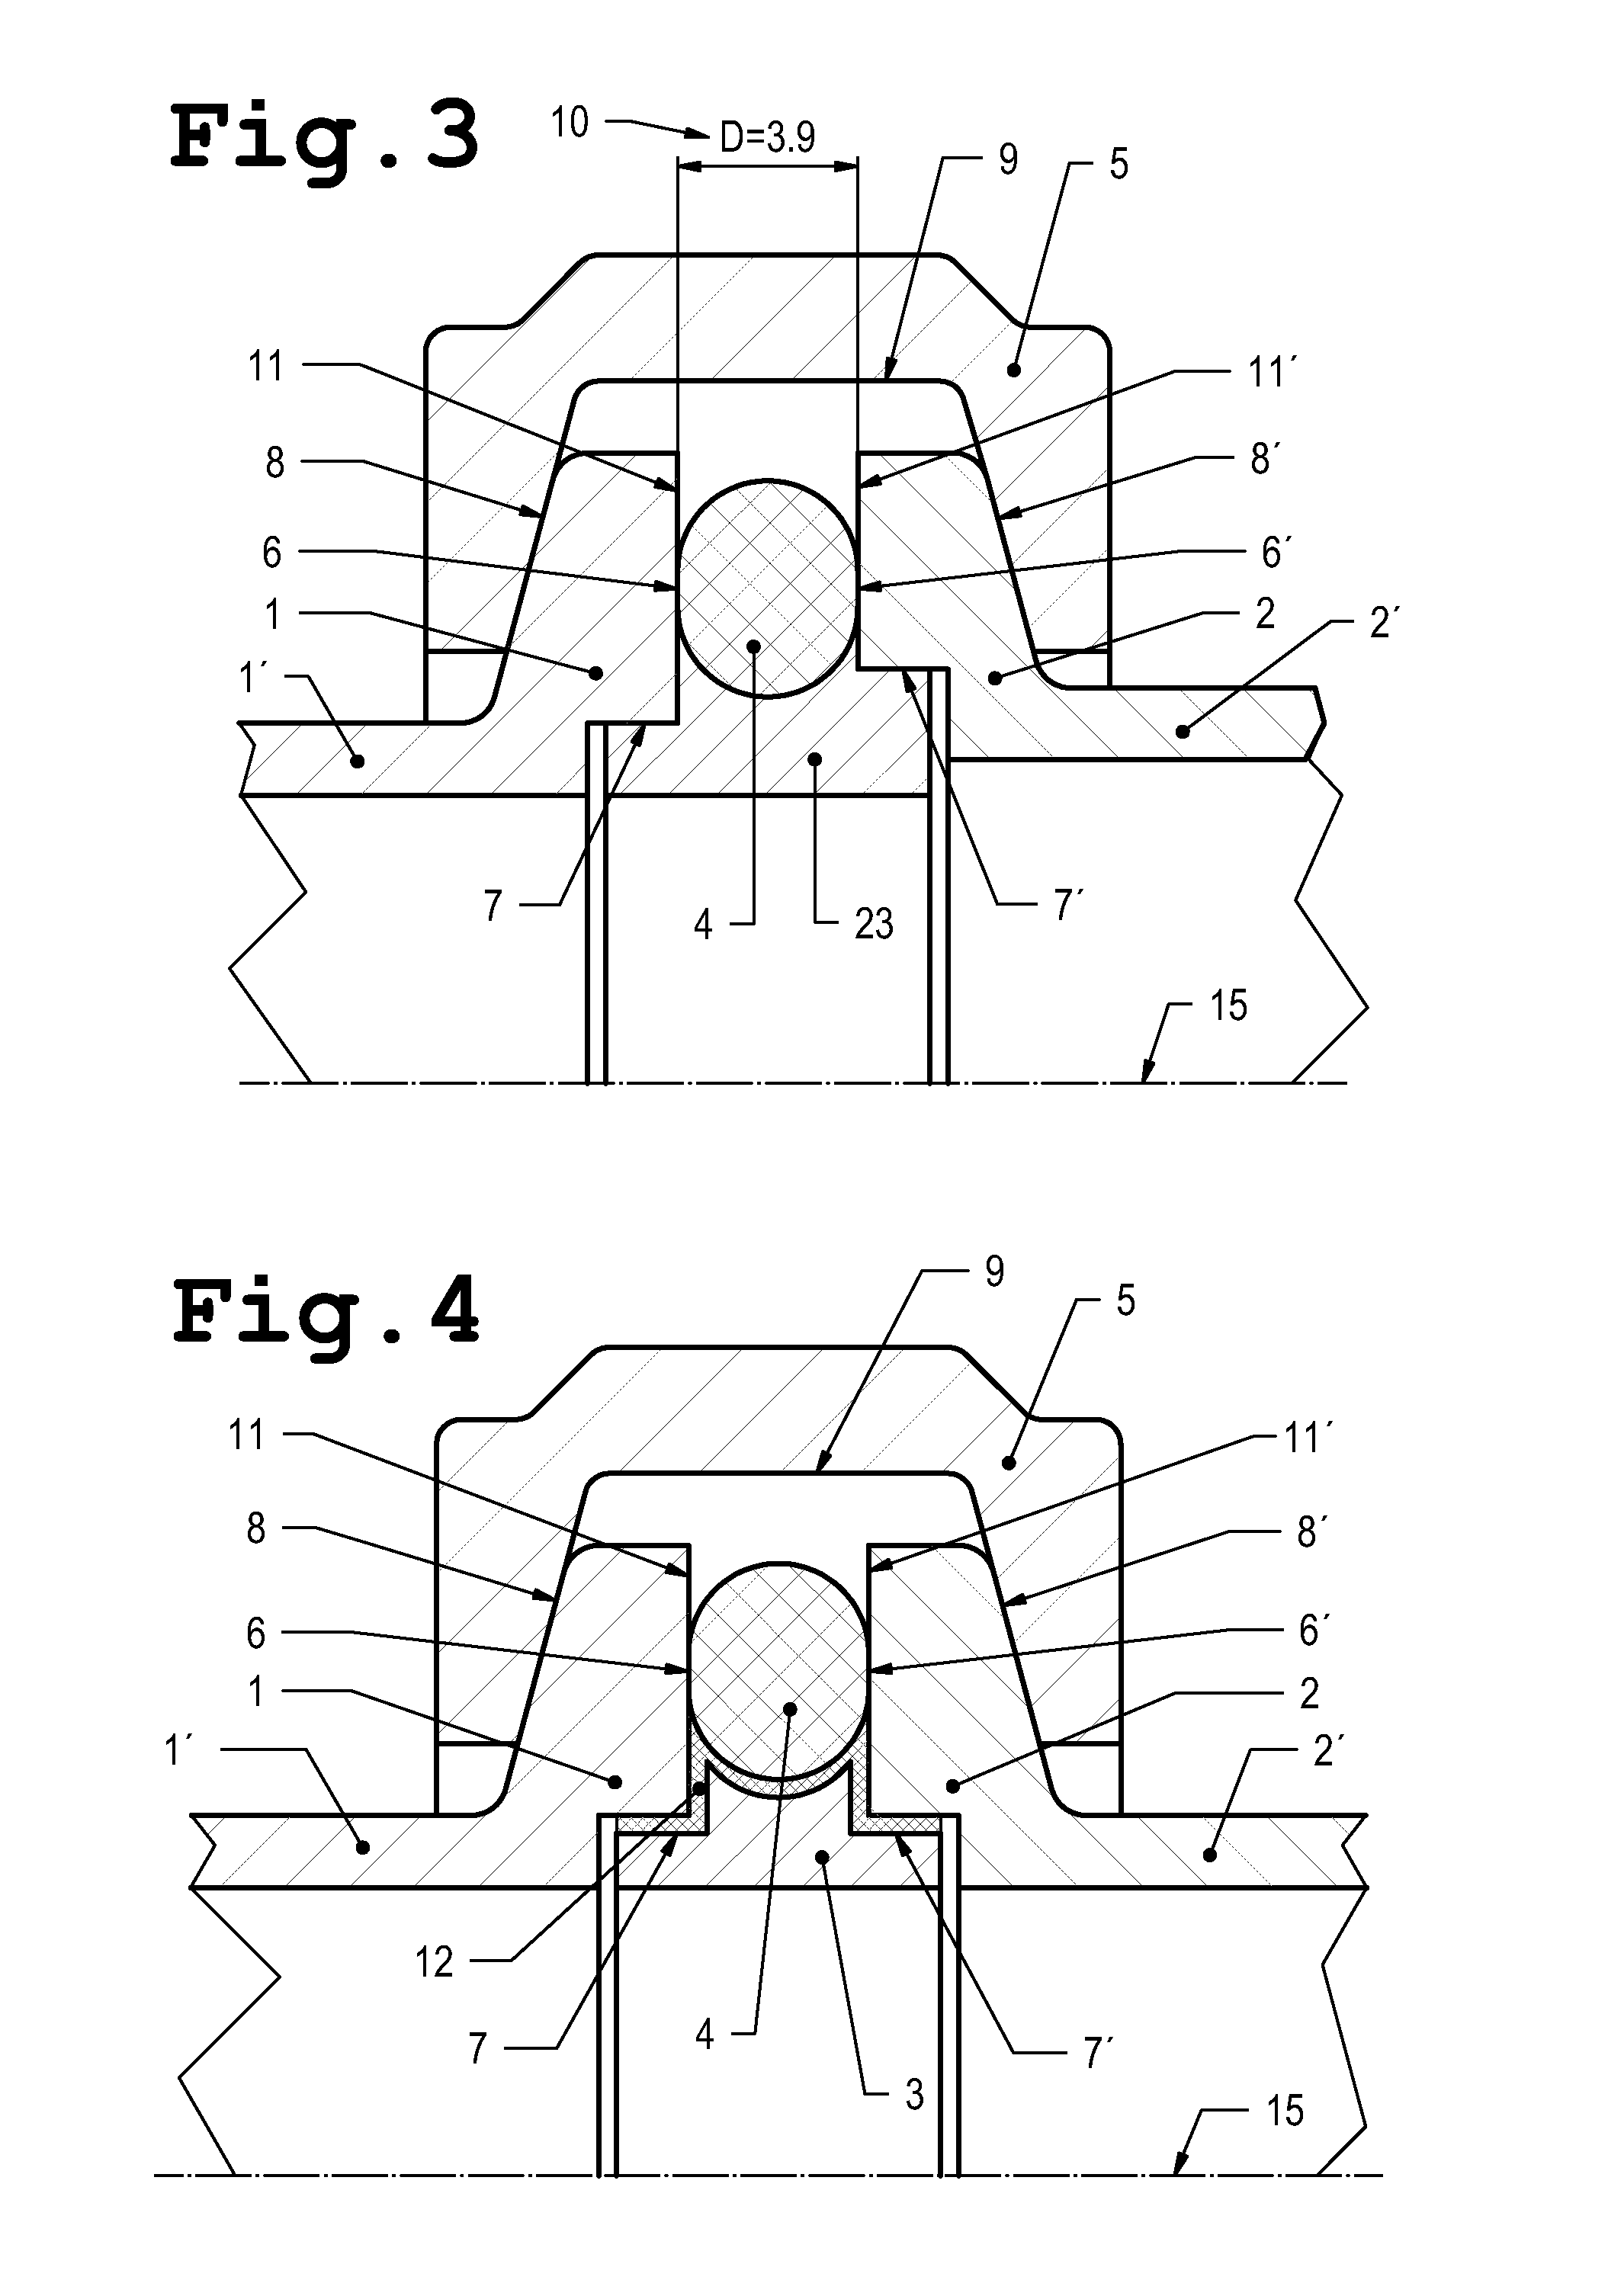 Flange connection